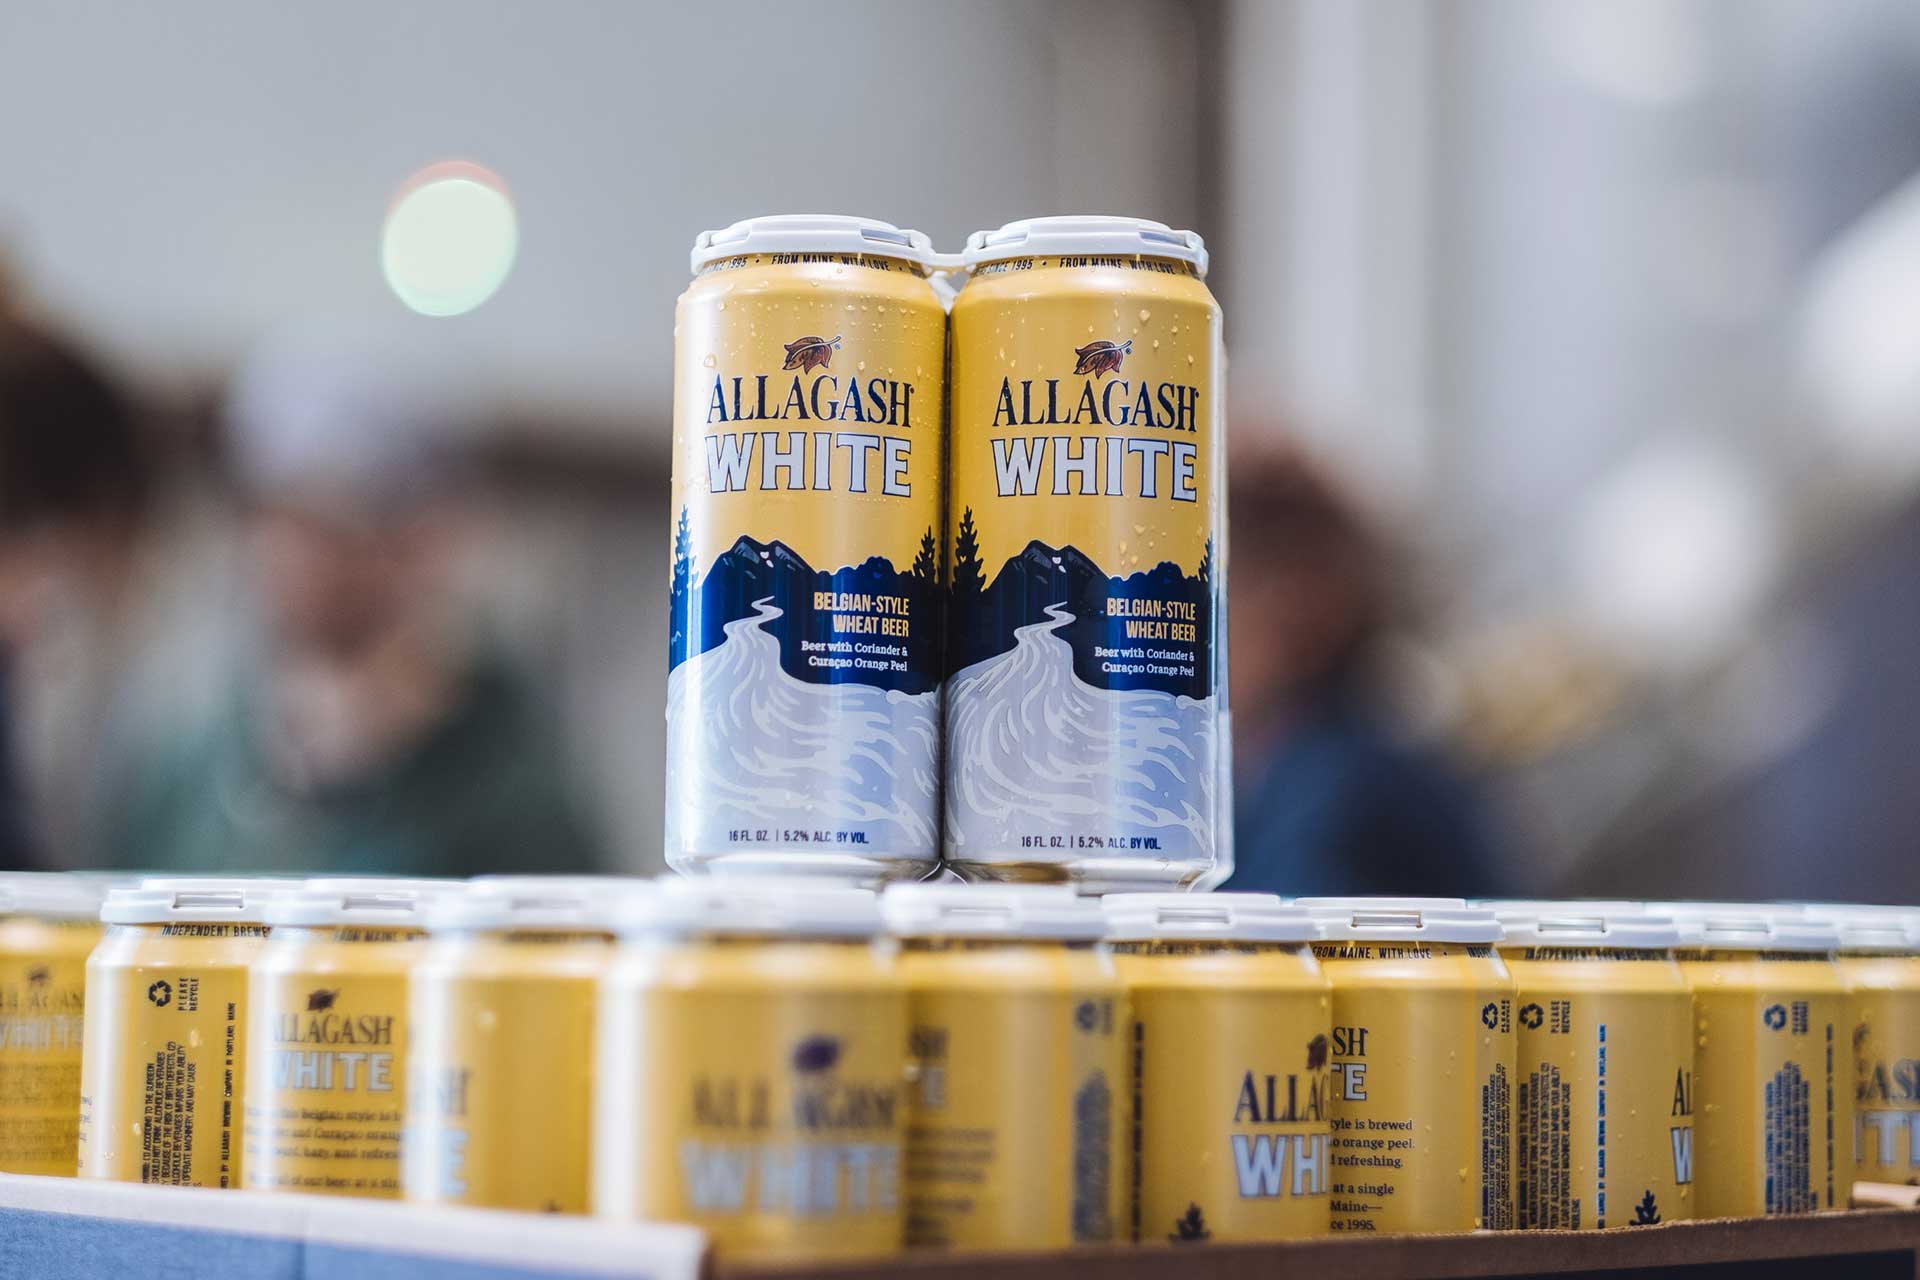 Allagash White four pack of 16 oz. cans